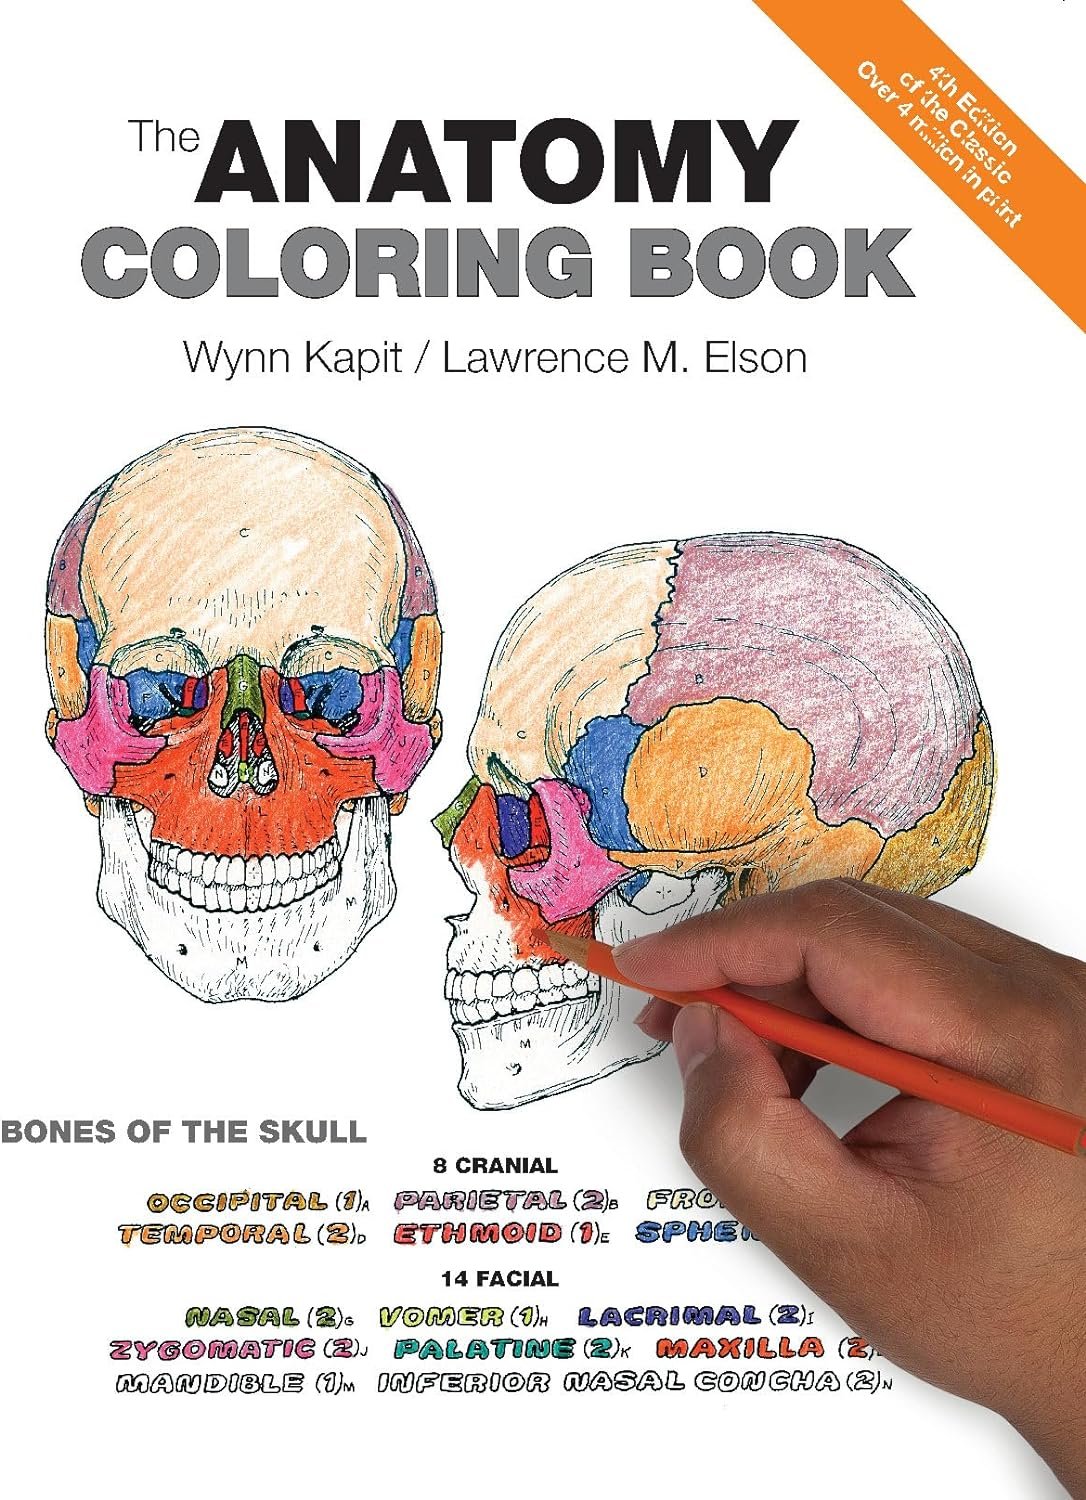 The Anatomy Coloring Book Review